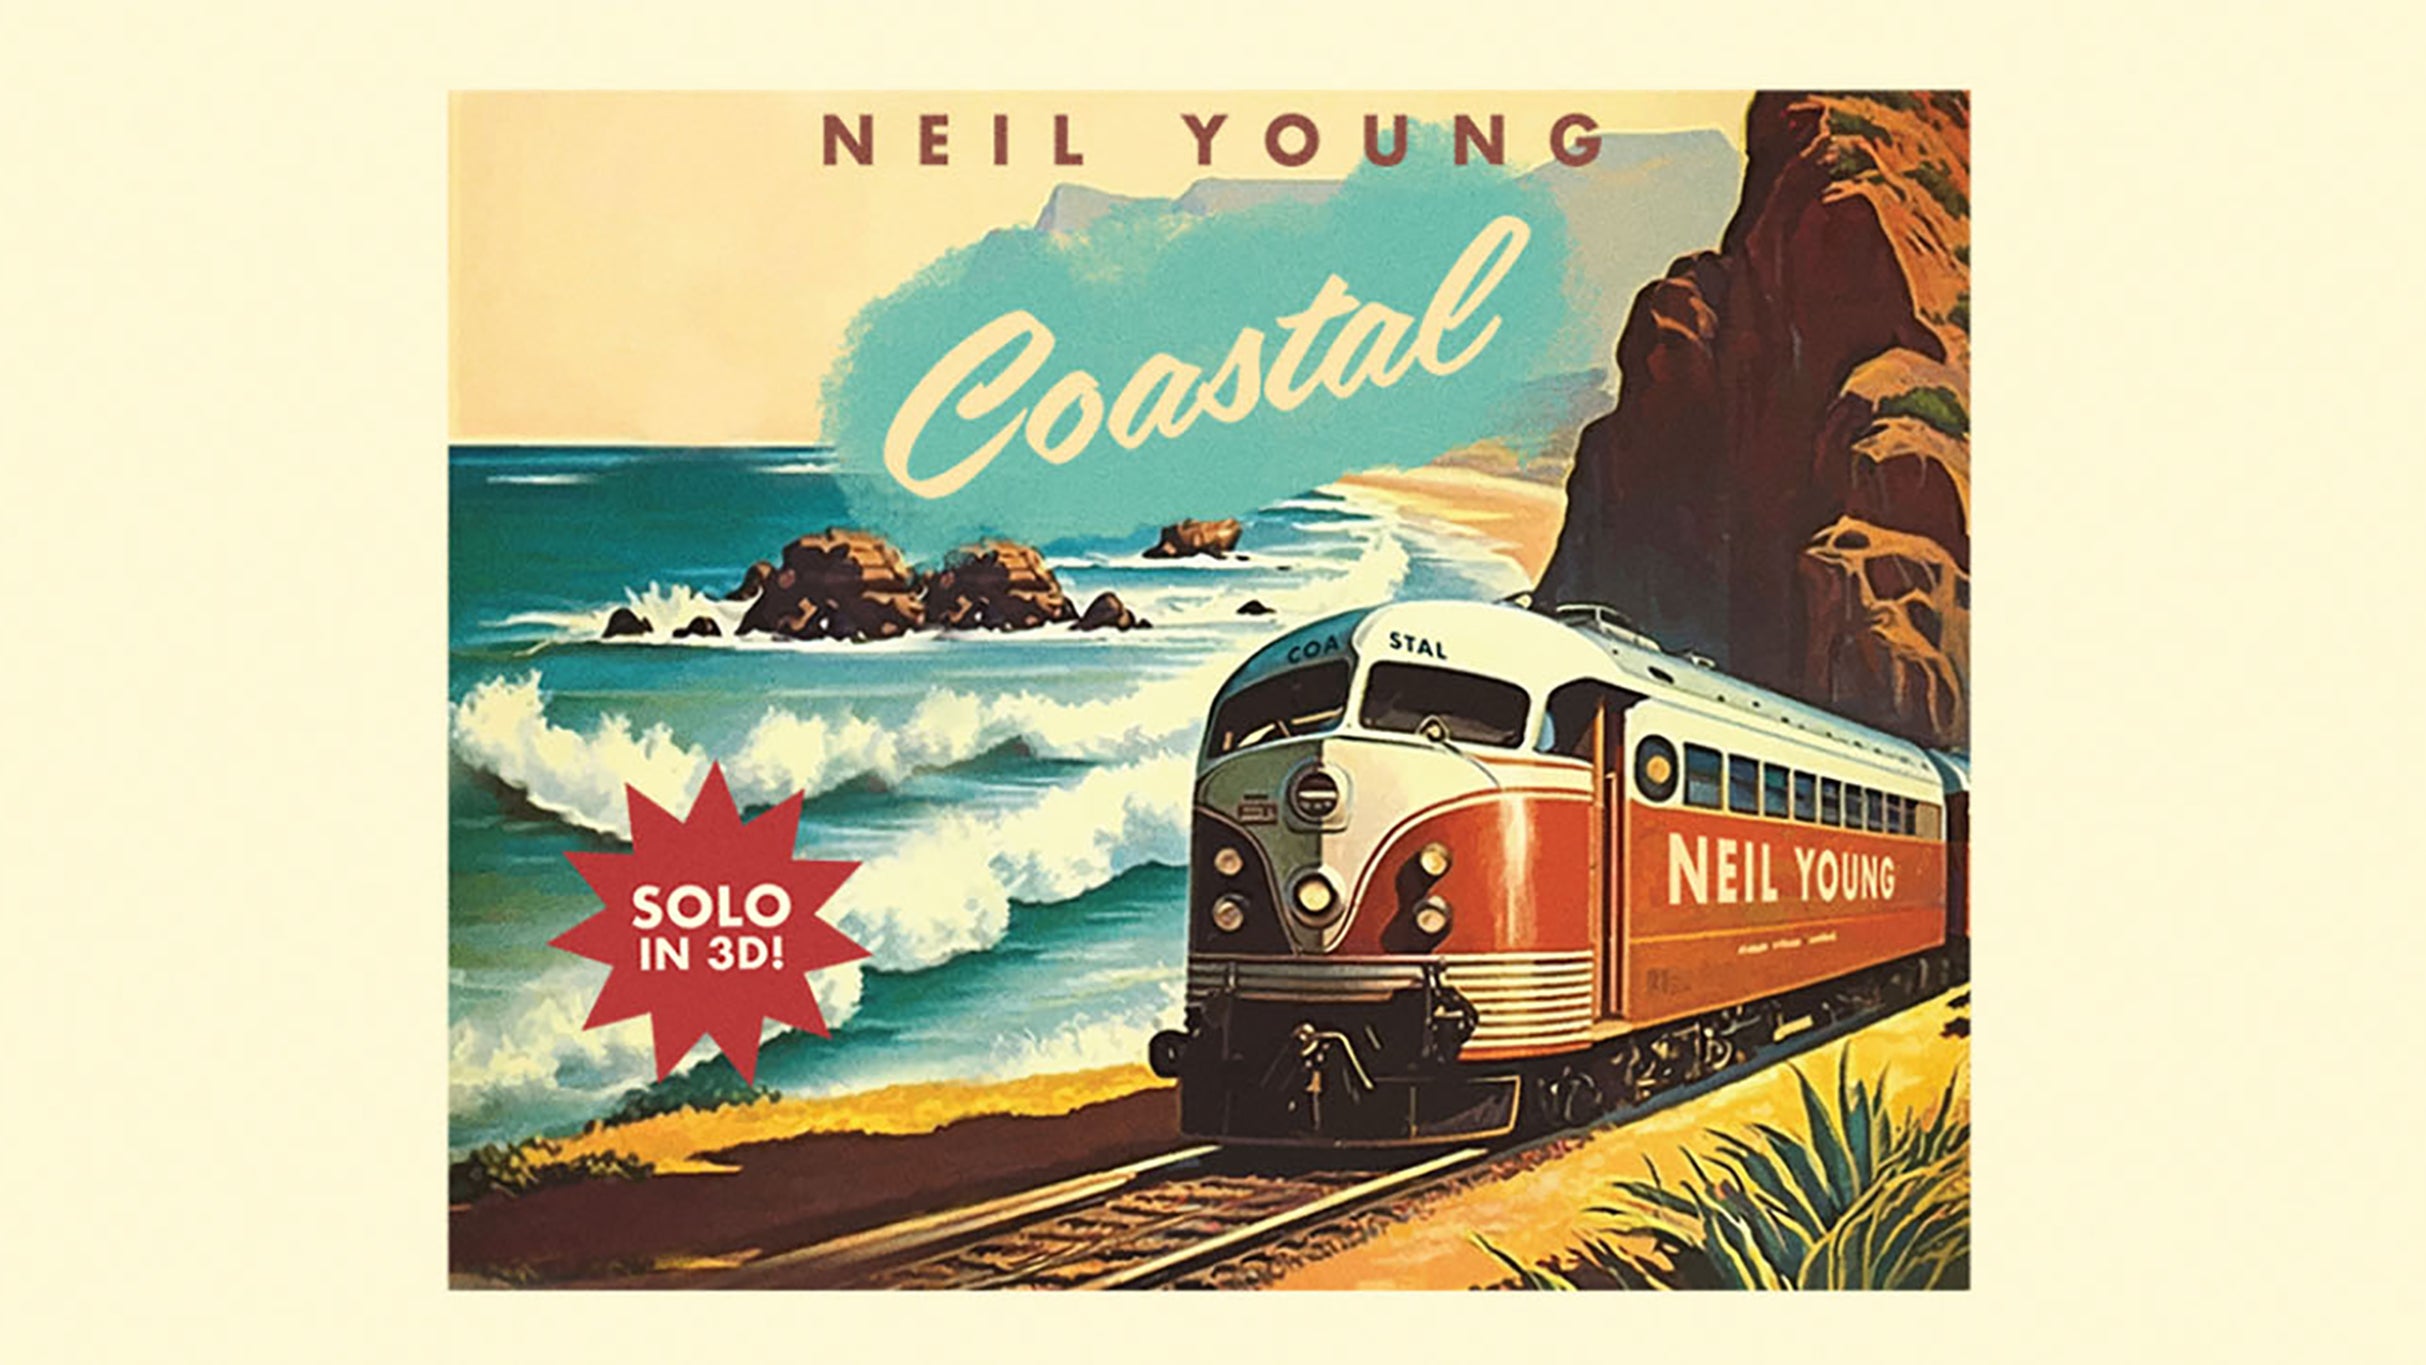 Neil Young in Los Angeles promo photo for Fan presale offer code